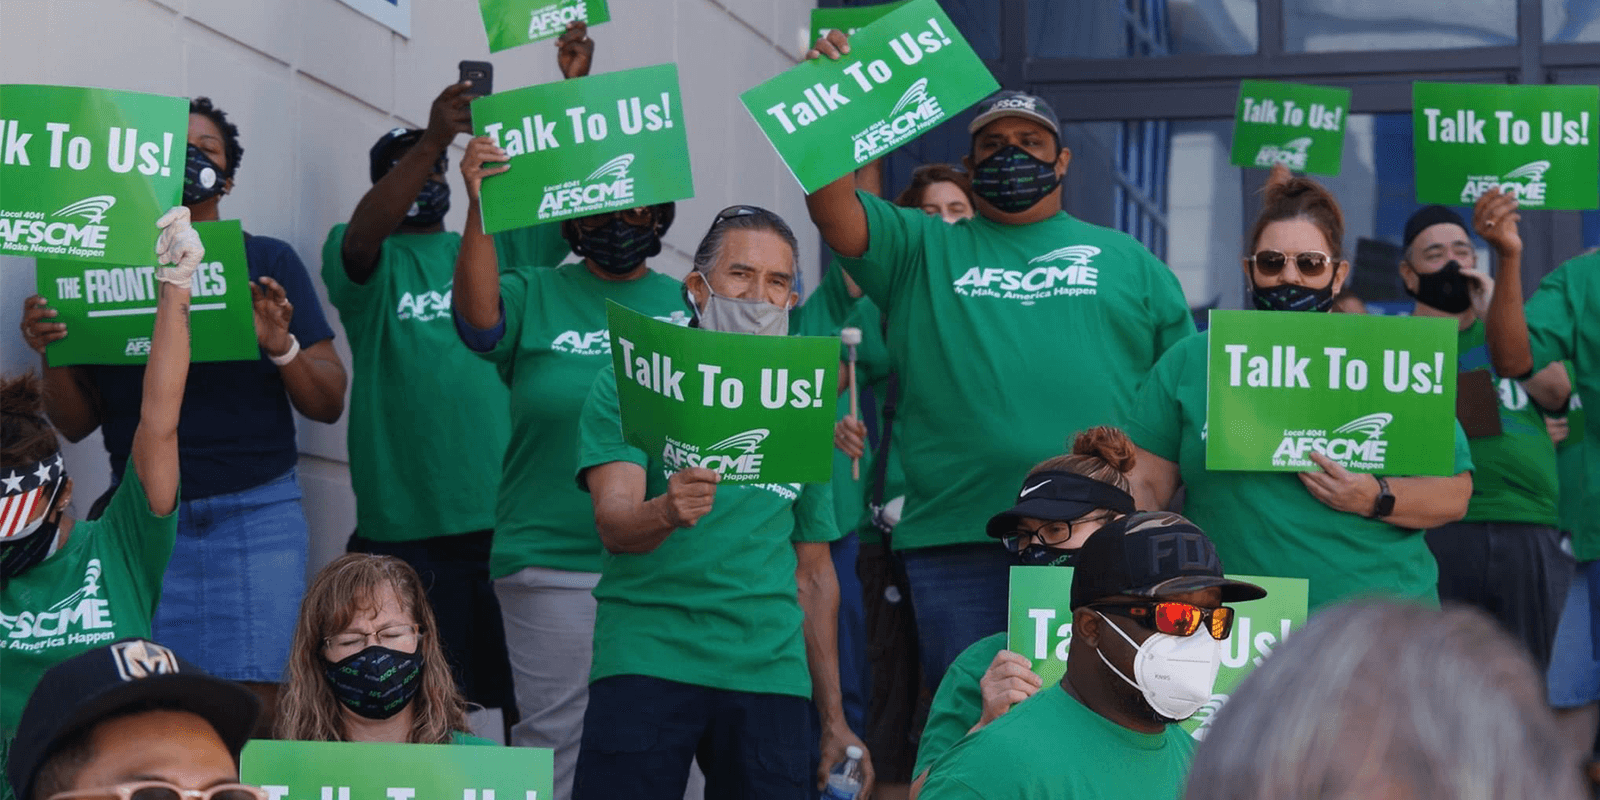 AFSCME Local 4041 members file unfair labor practice complaint against State of Nevada